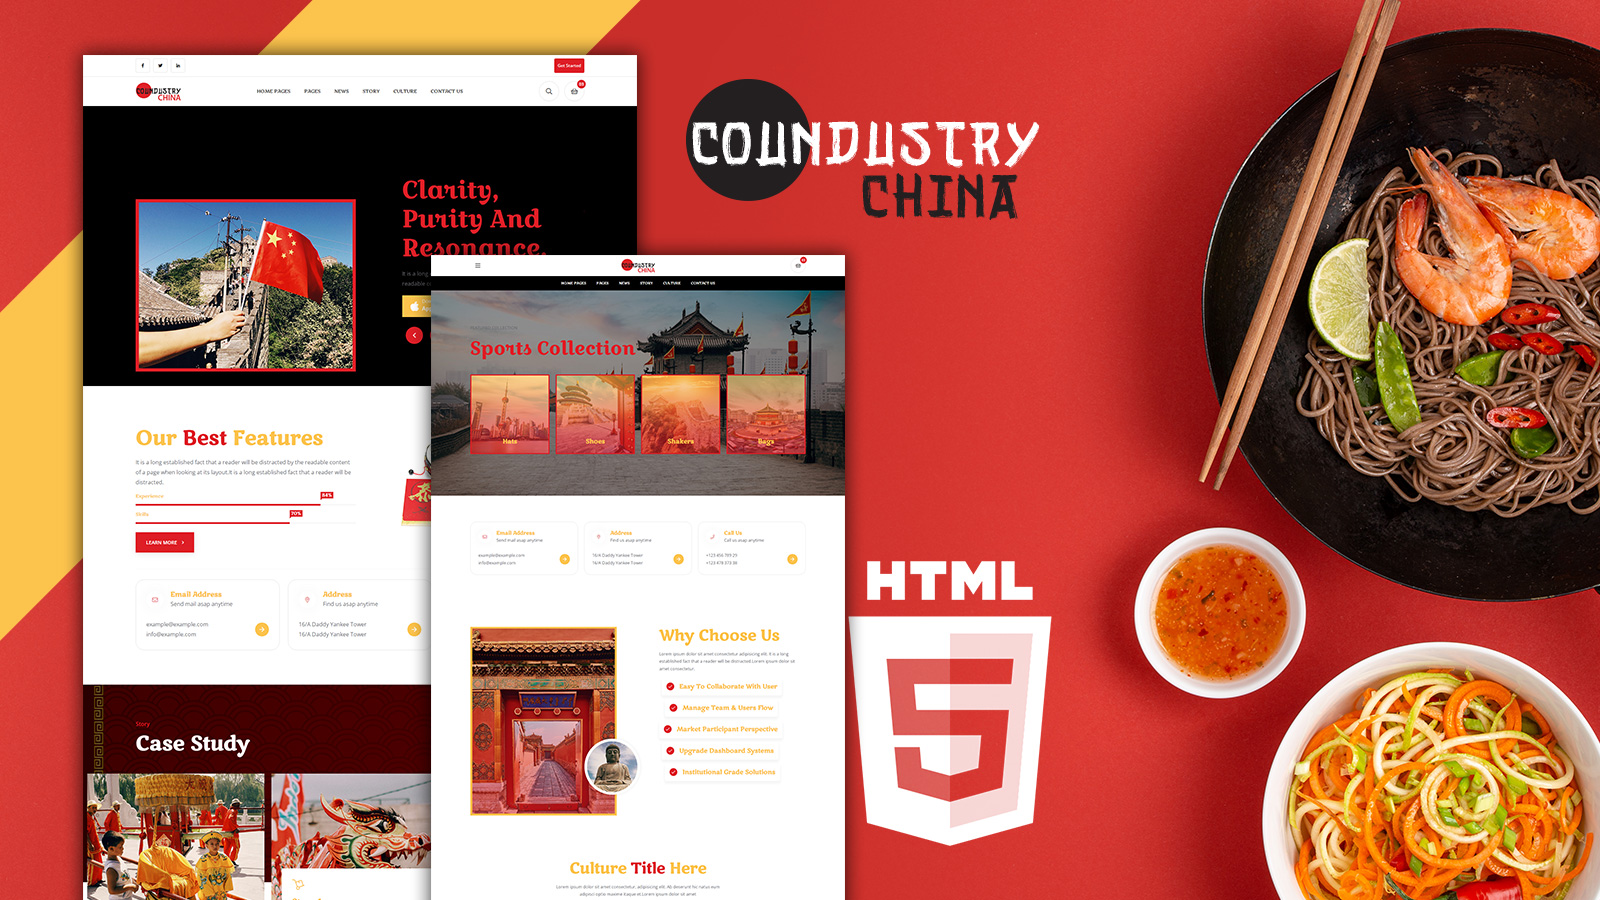 Coundustry China Culture HTML5 Website Template